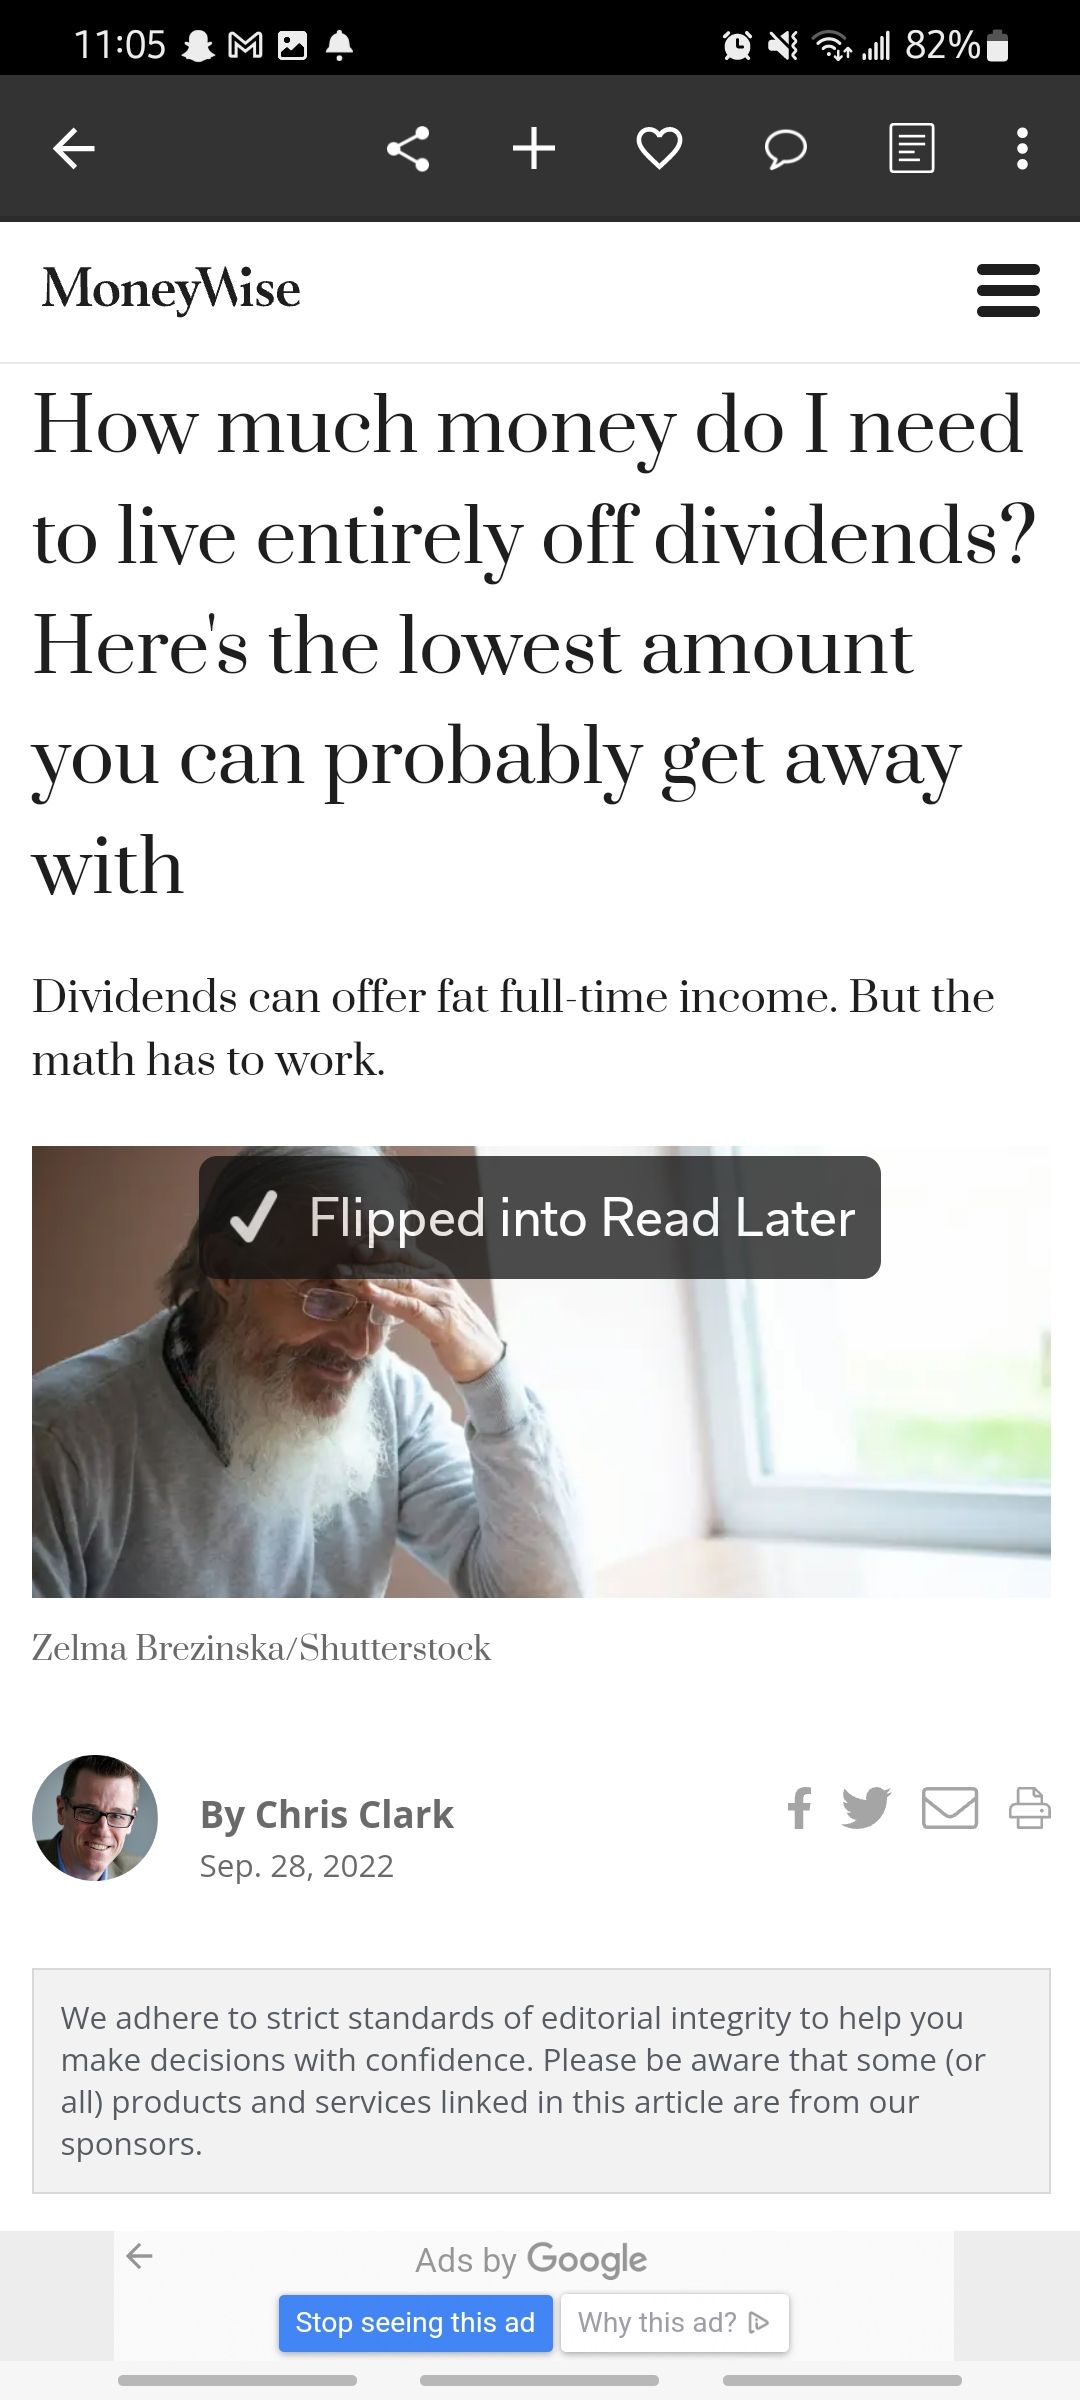 moneywise article showing it's been flipped into read later